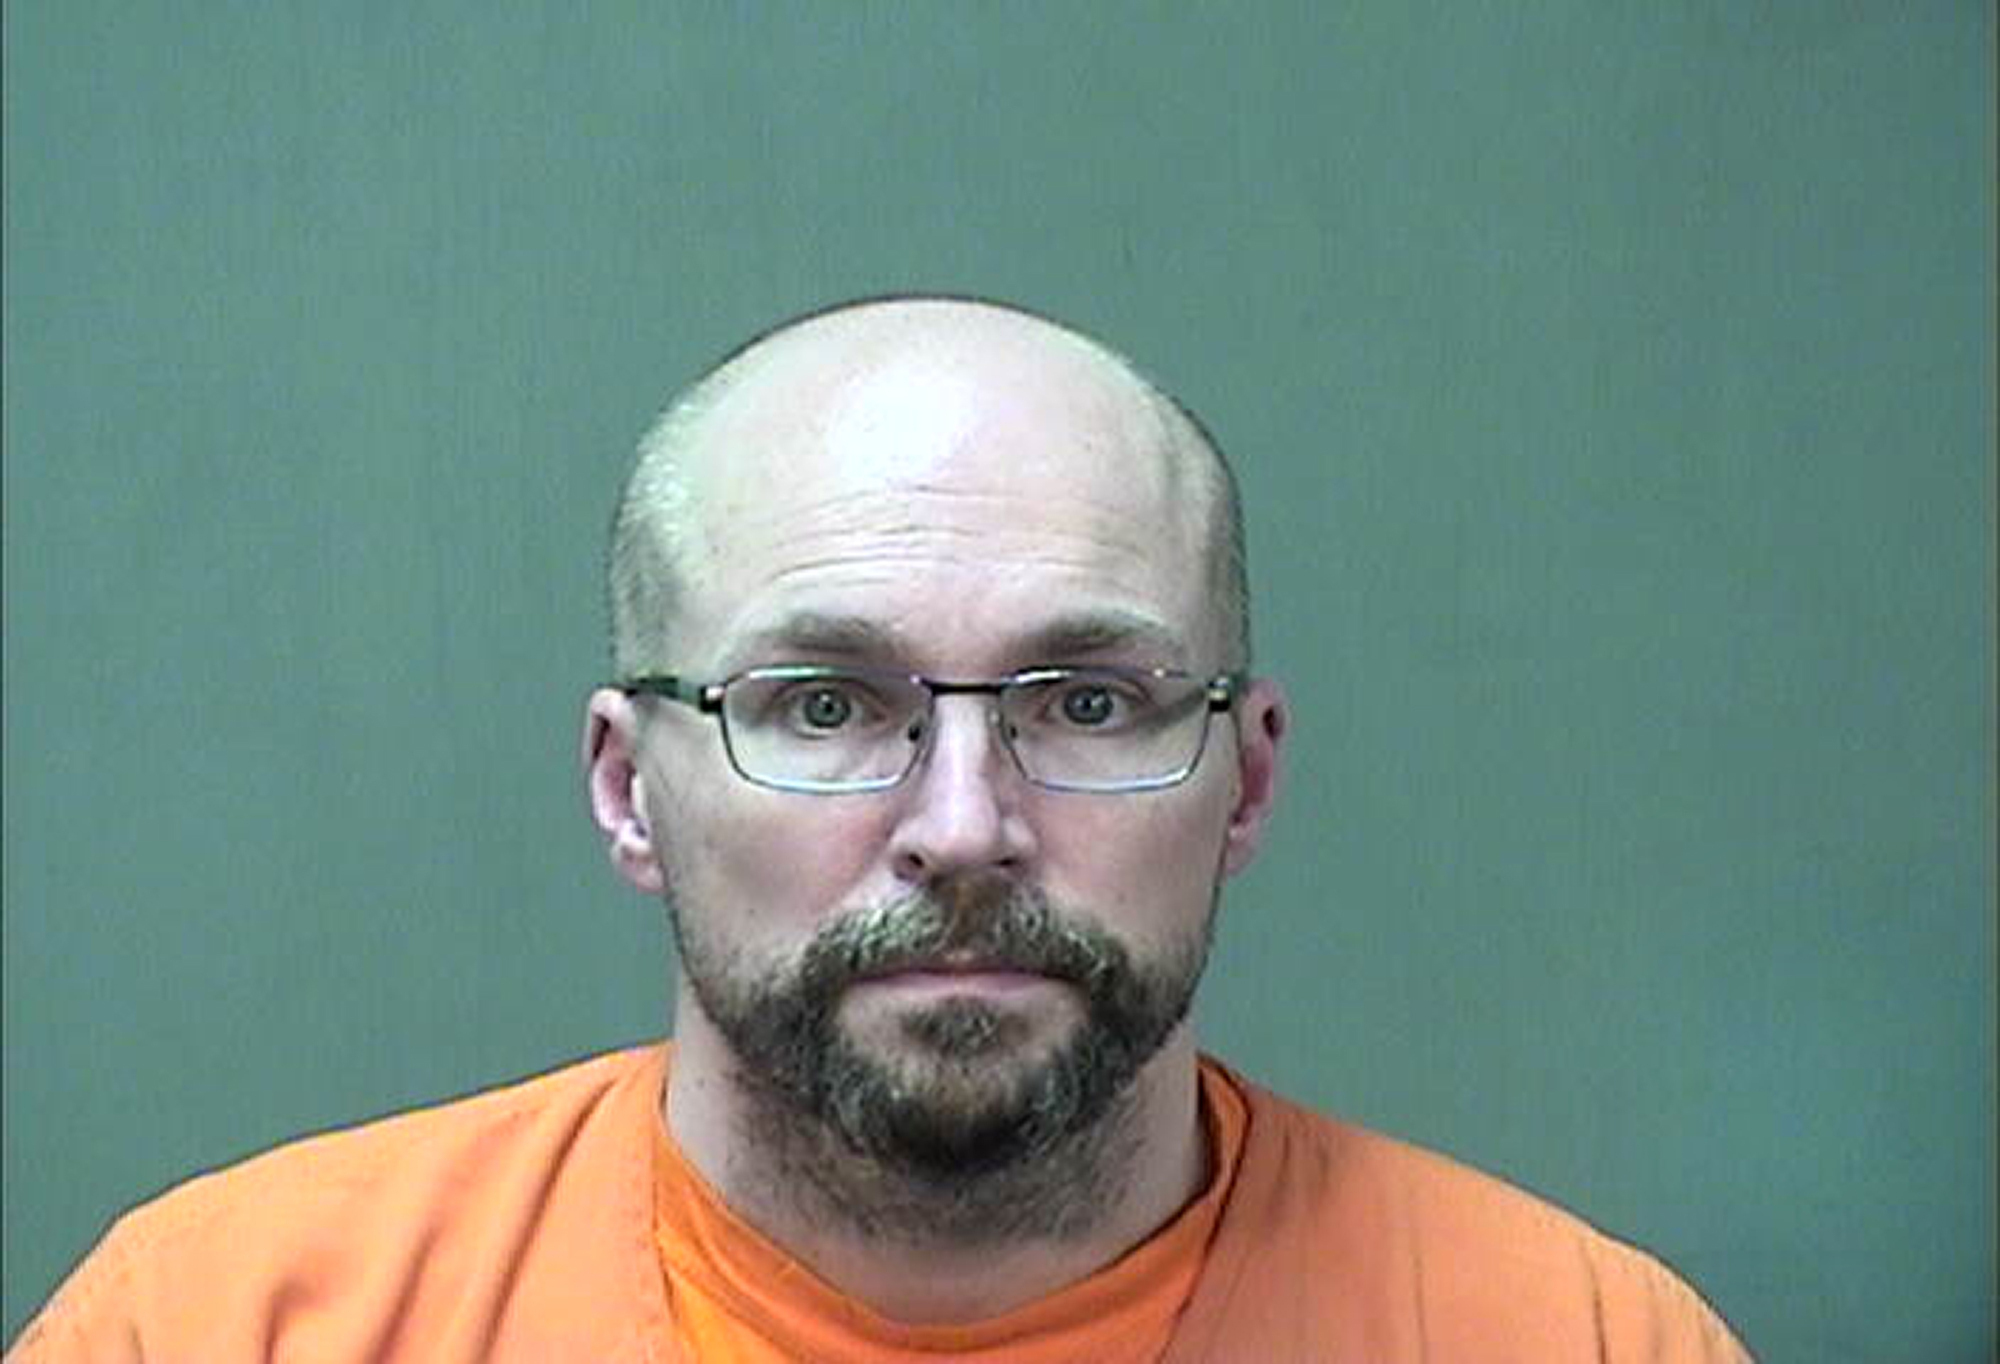 PHOTO: FILE - In this Jan. 4, 2021 booking photo provided by the Ozaukee County Sheriff's Office in Port Washington, Wis., Steven Brandenburg is shown.